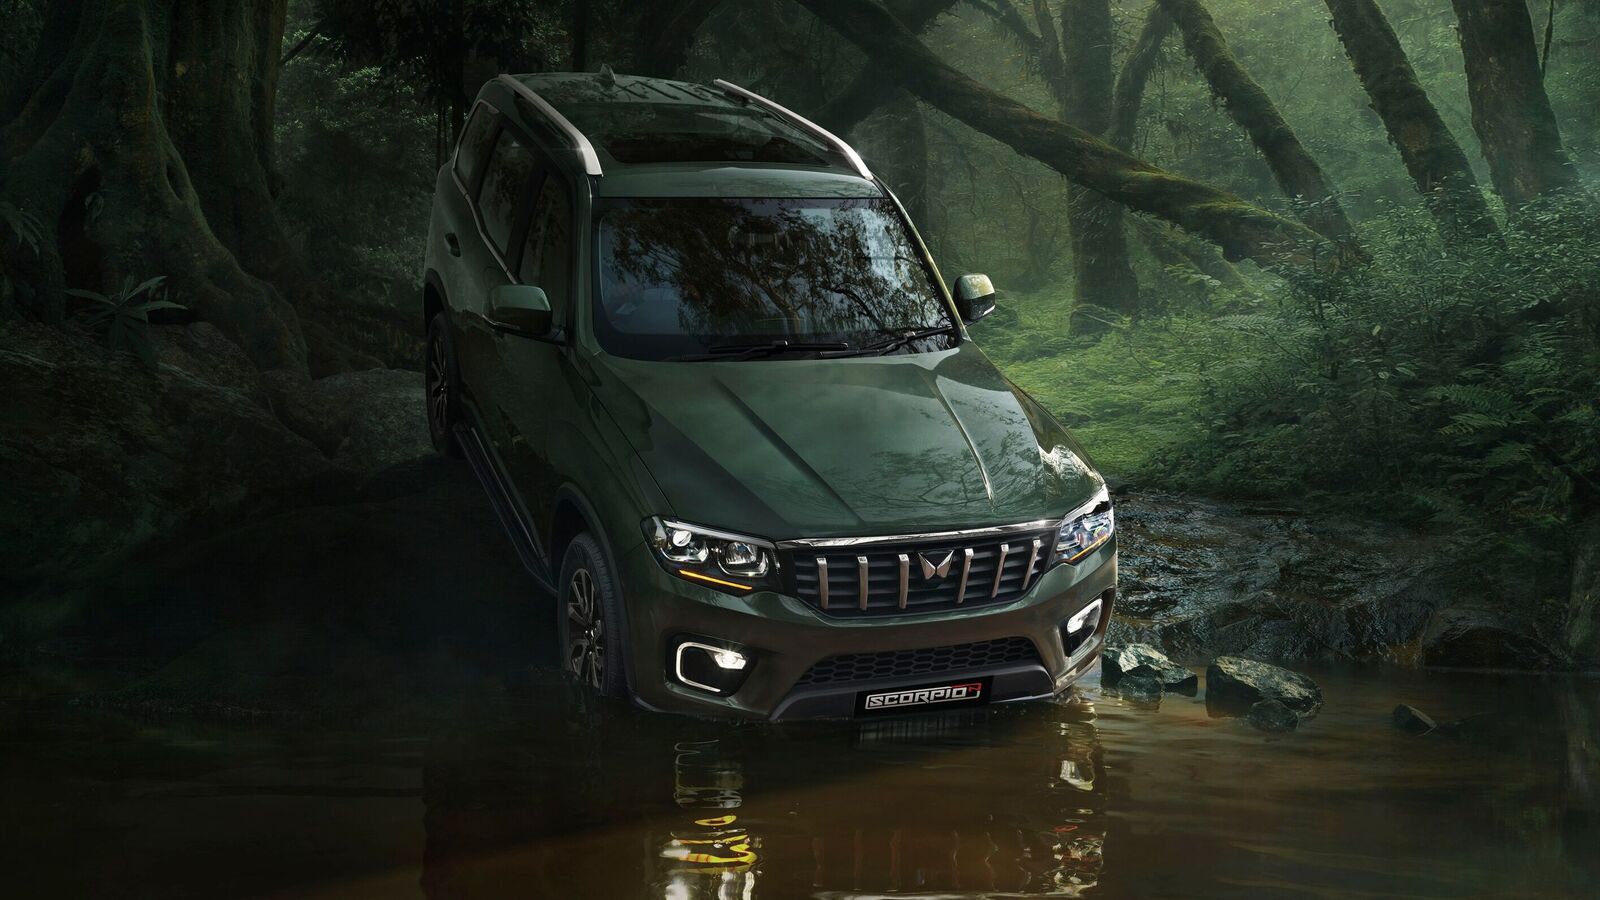 In pics: Check out first official images of much-awaited Mahindra Scorpio N